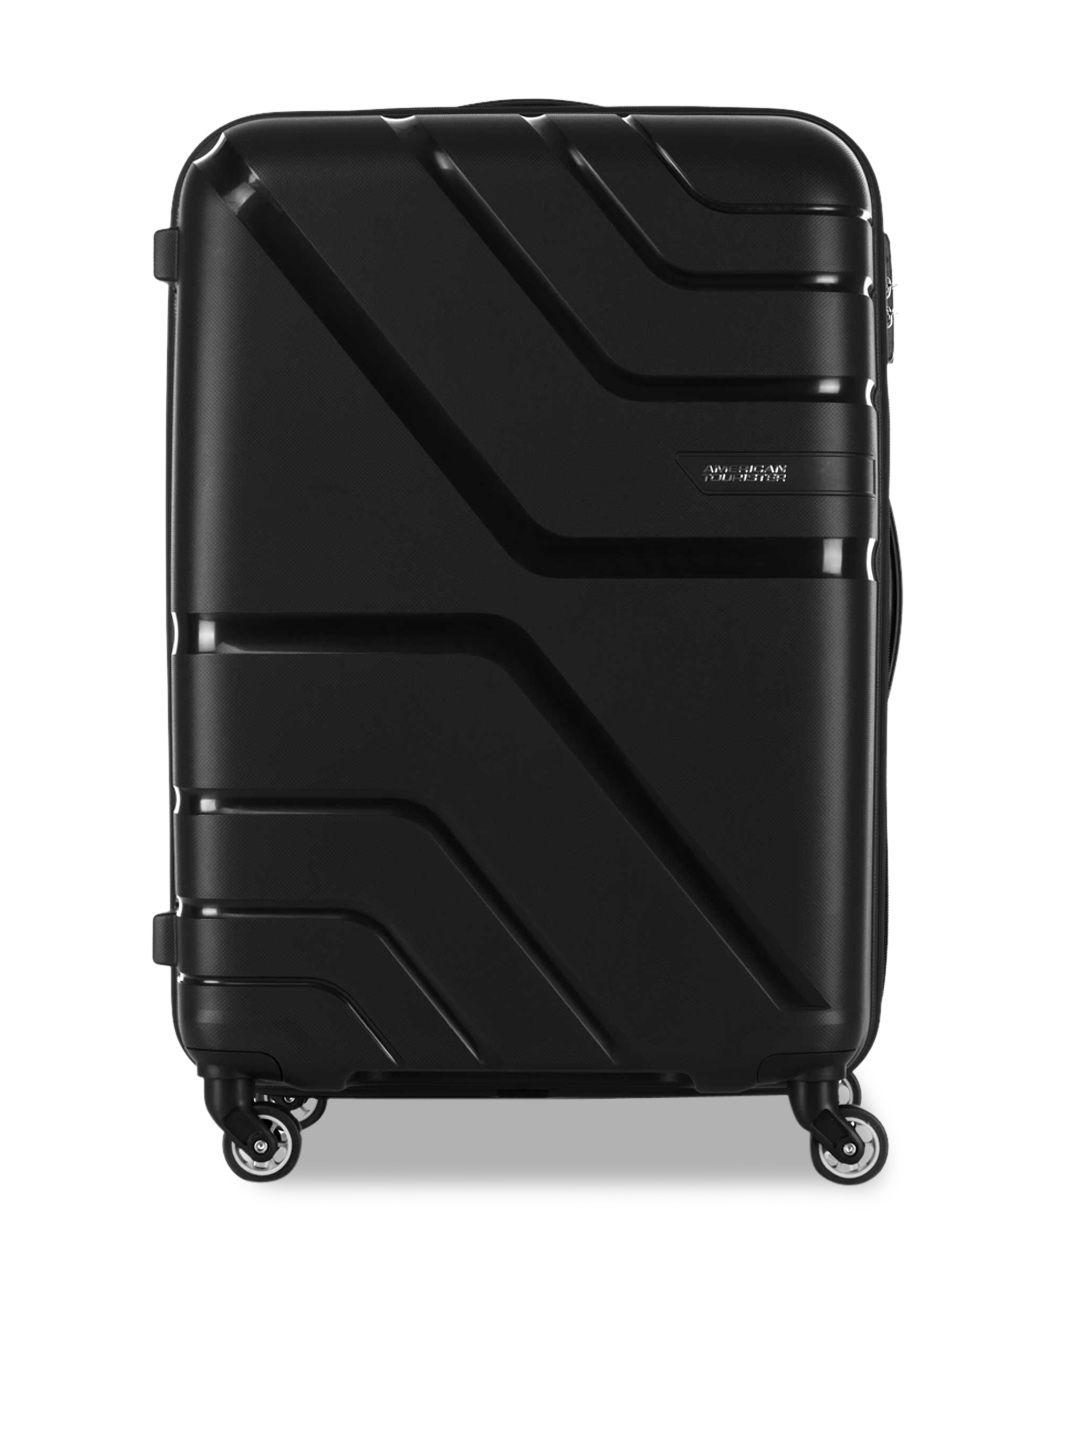 american tourister hard-sided large trolley suitcase